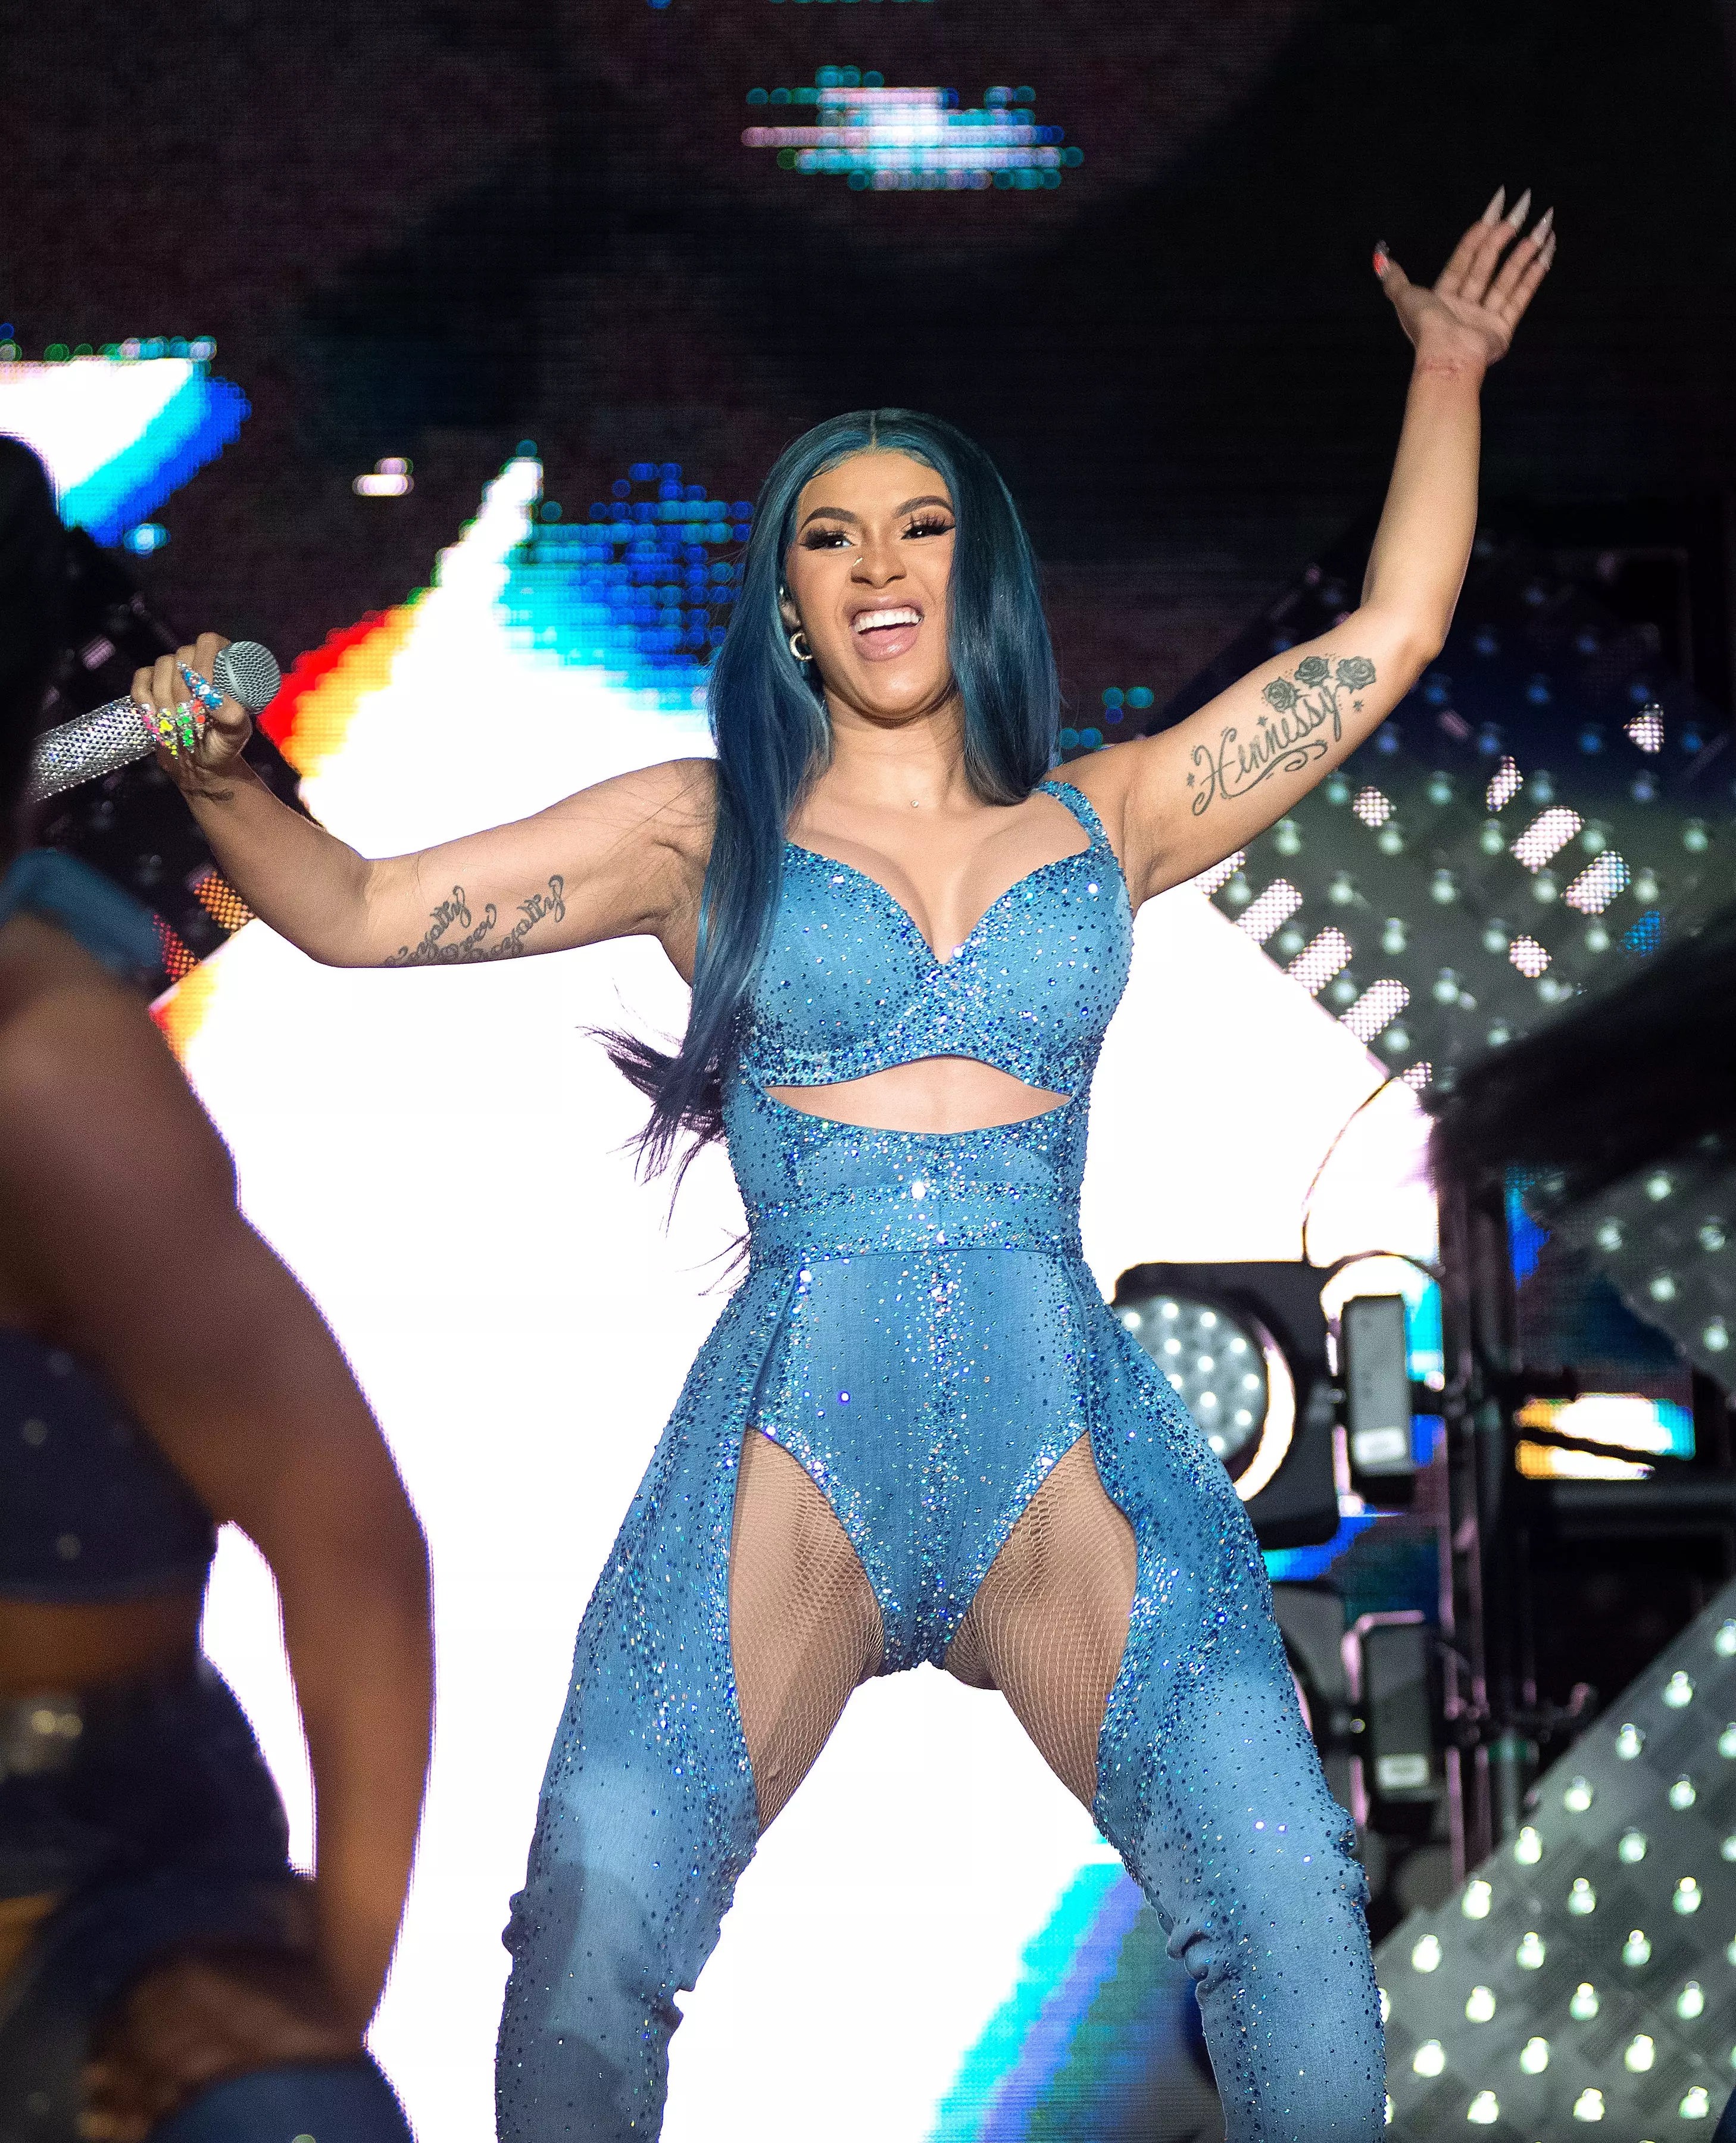 Cardi B shows off some of her tattoos